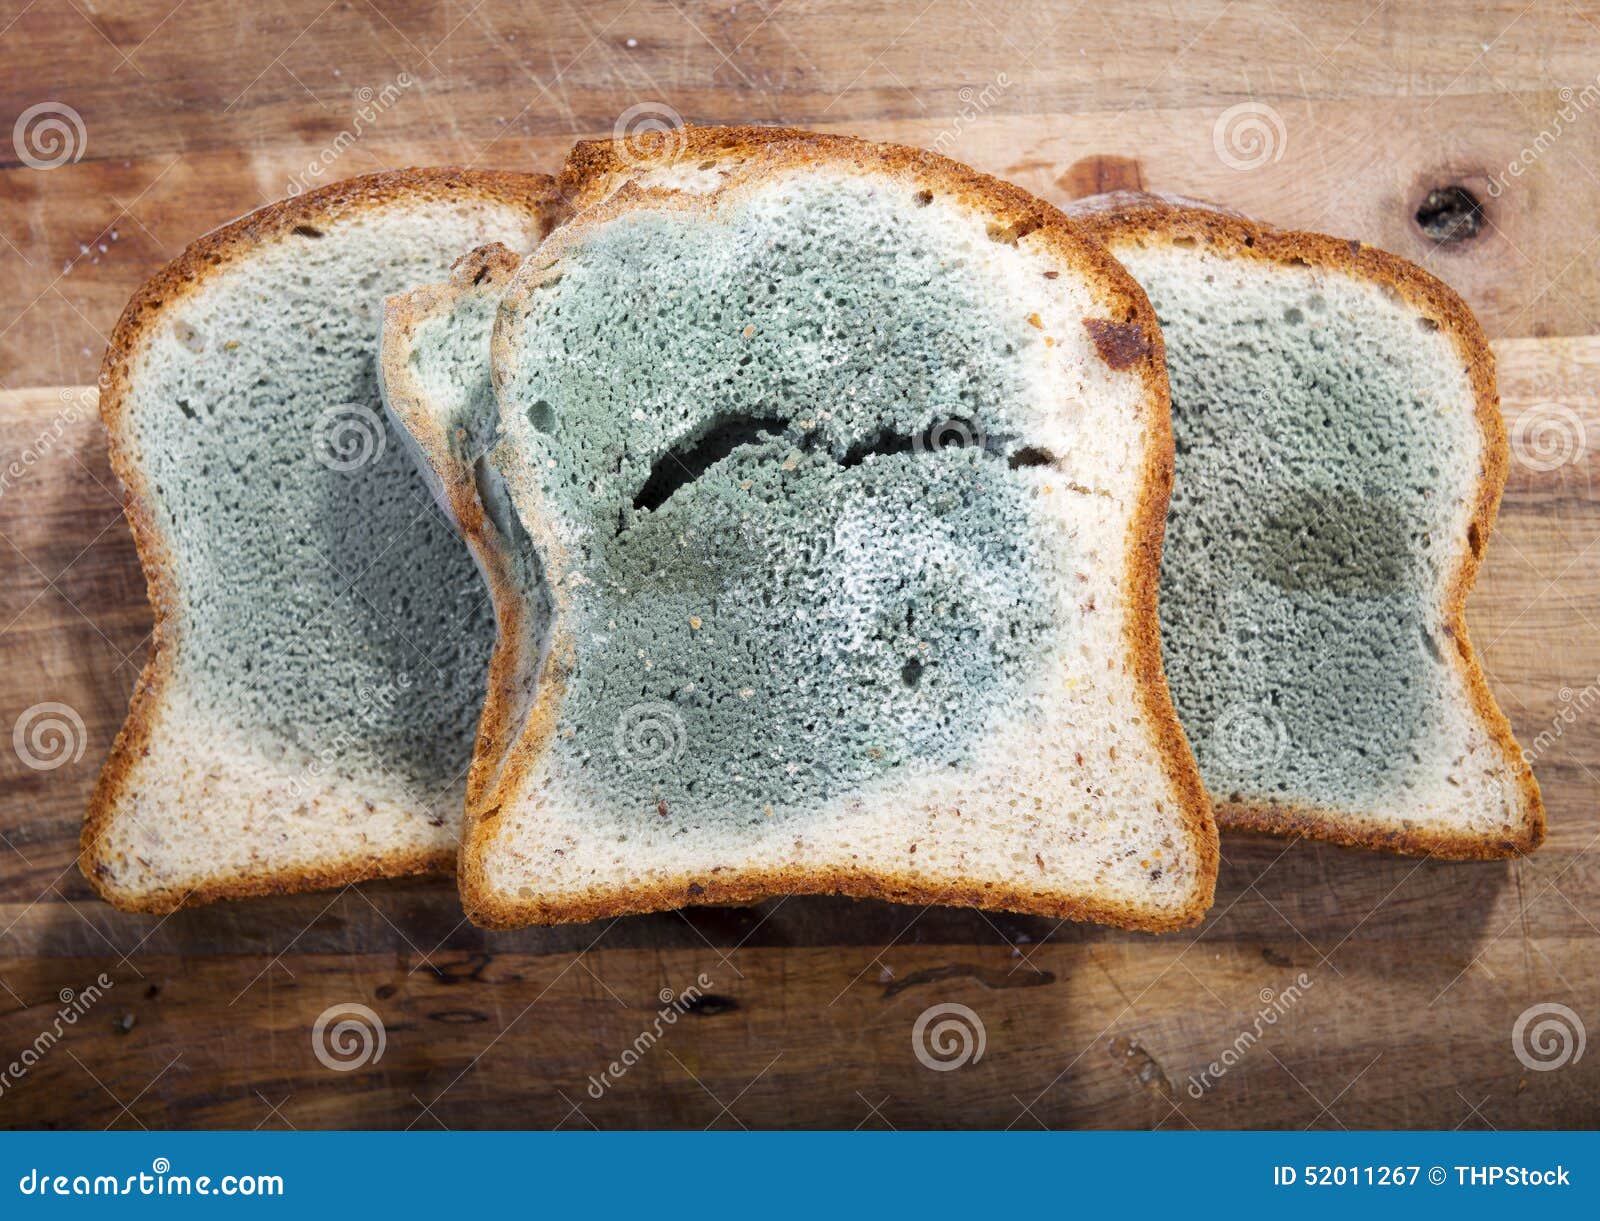 https://thumbs.dreamstime.com/z/moldy-bread-mold-growing-rapidly-green-white-spores-52011267.jpg